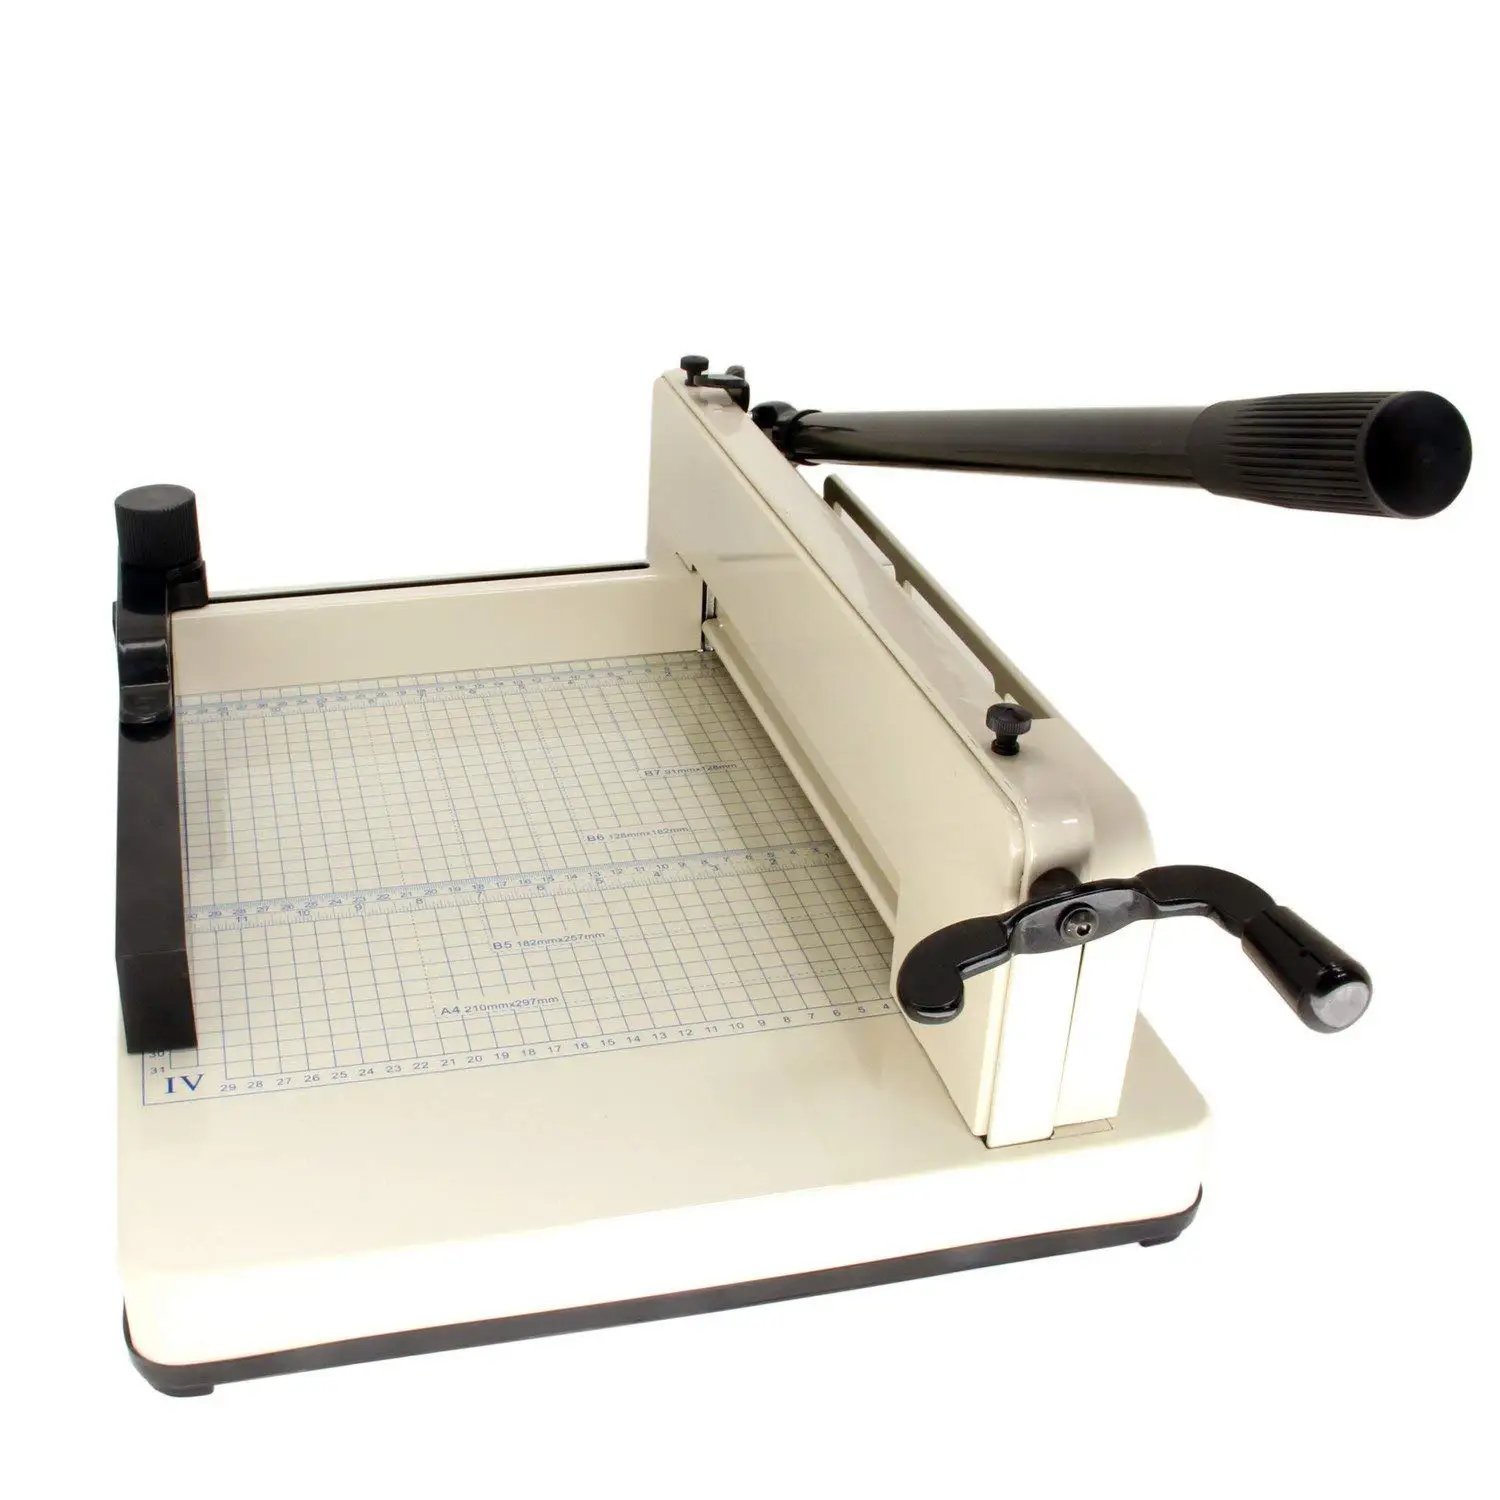 17” Blade A3 Large Paper Cutter Guillotine 400 Sheets Cutting